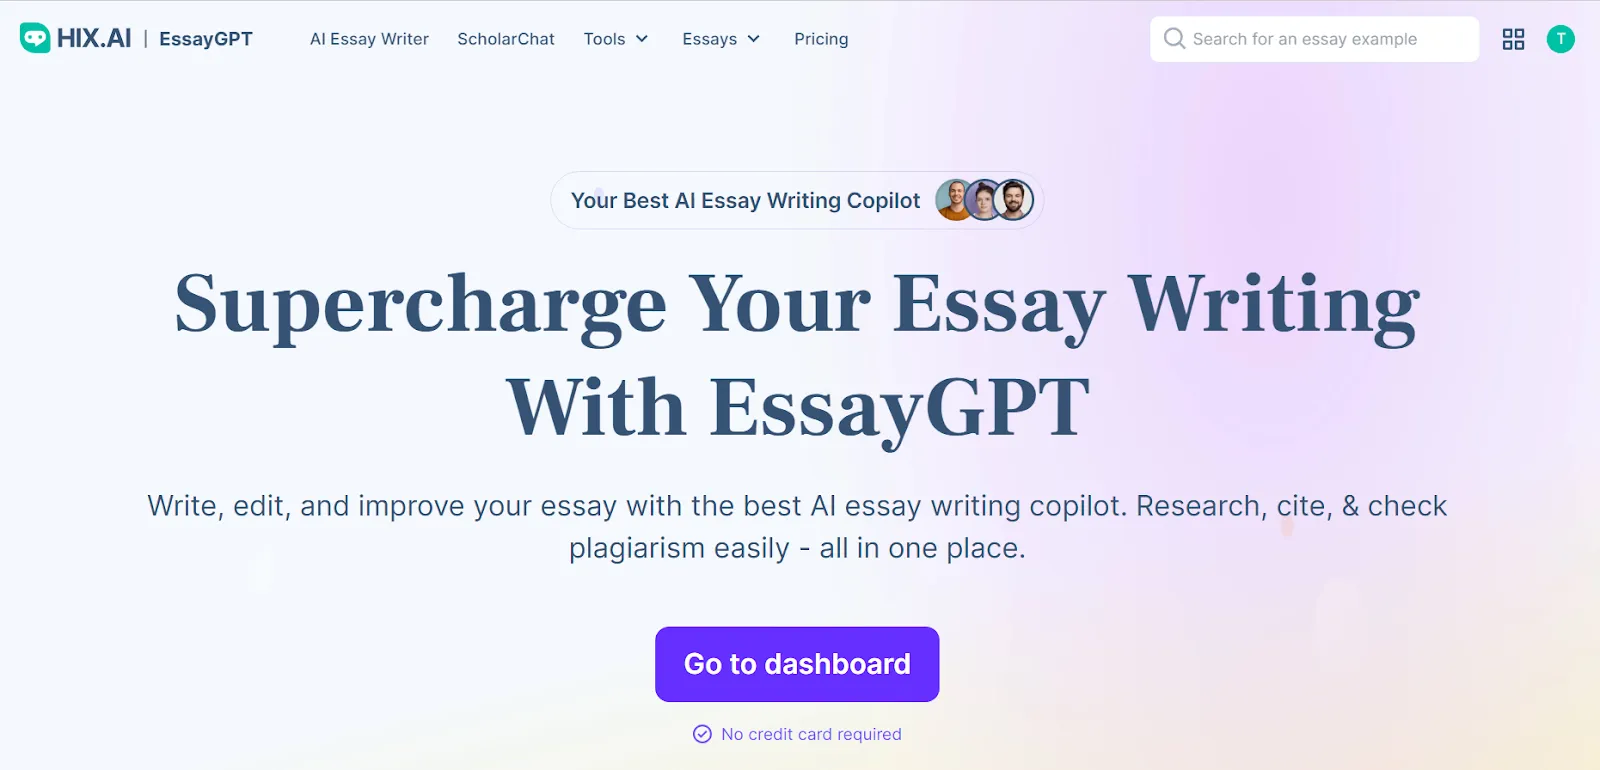 How to Use Popular Essay Examples to Master Essay Writing